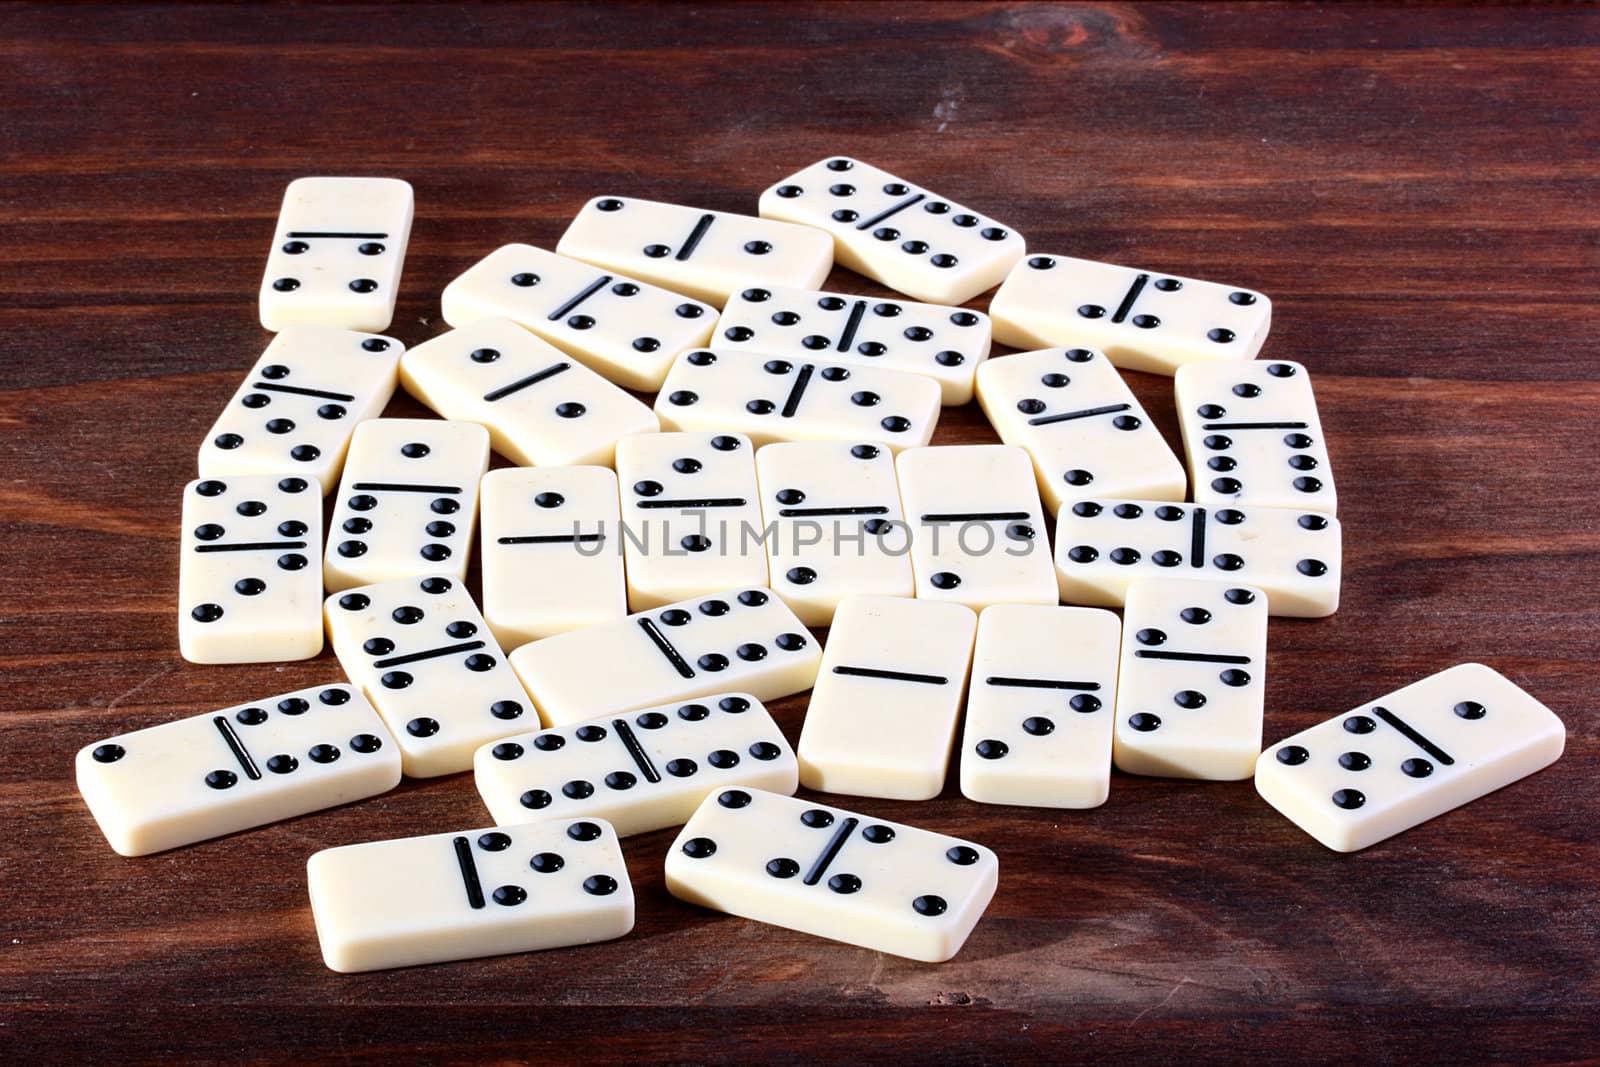 Dominoes on a wooden table. Game popular all over the world.